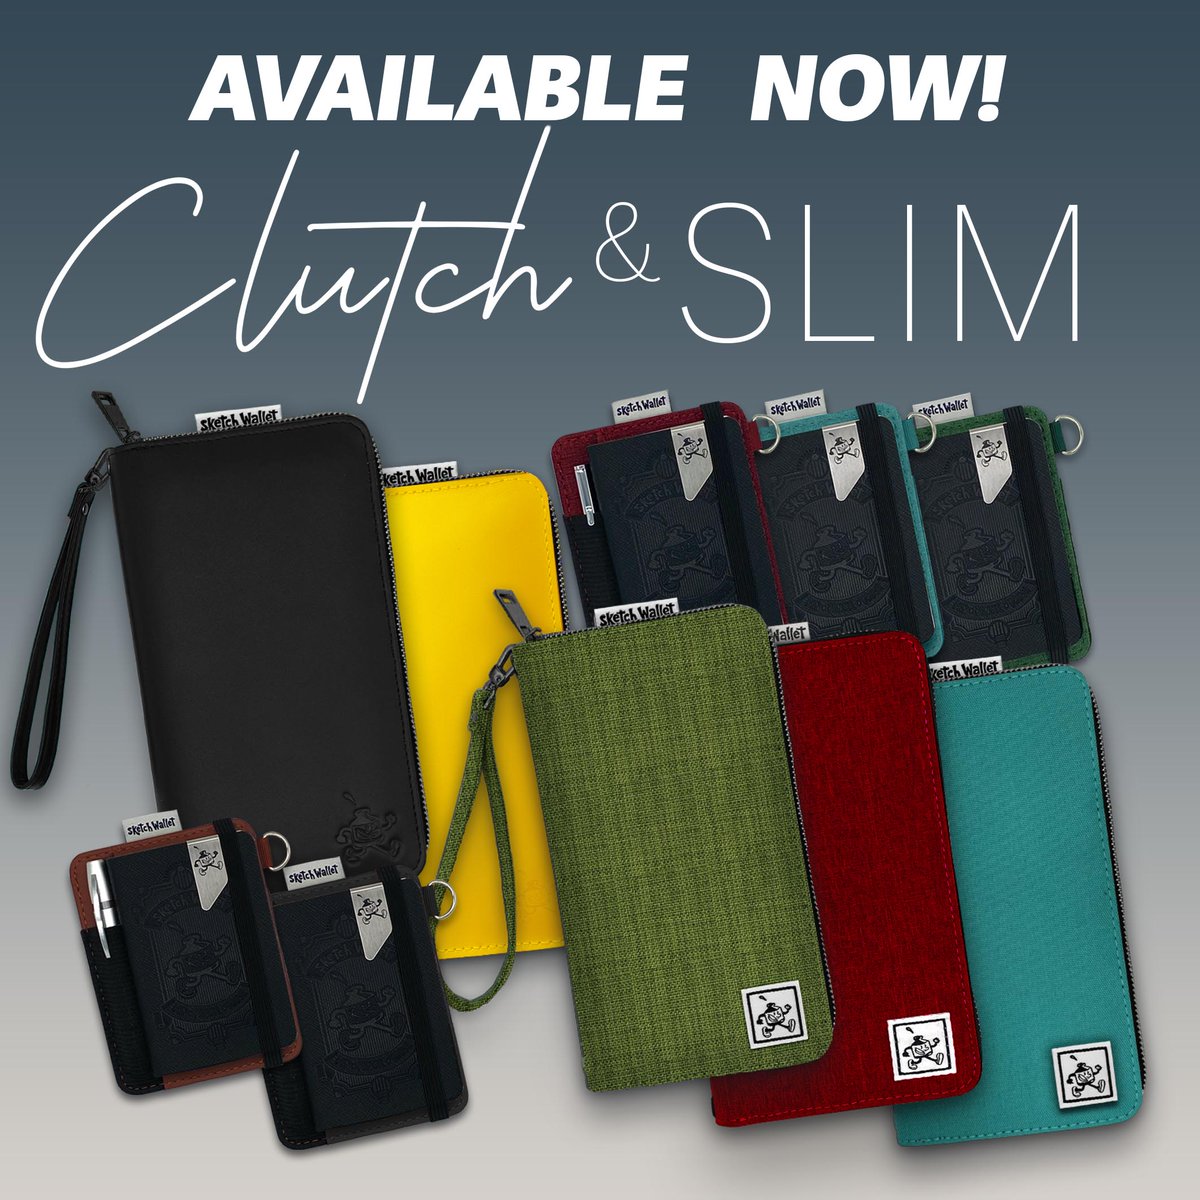 The wait is over, Clutch and Slim Sketch Wallets are available on our website now!